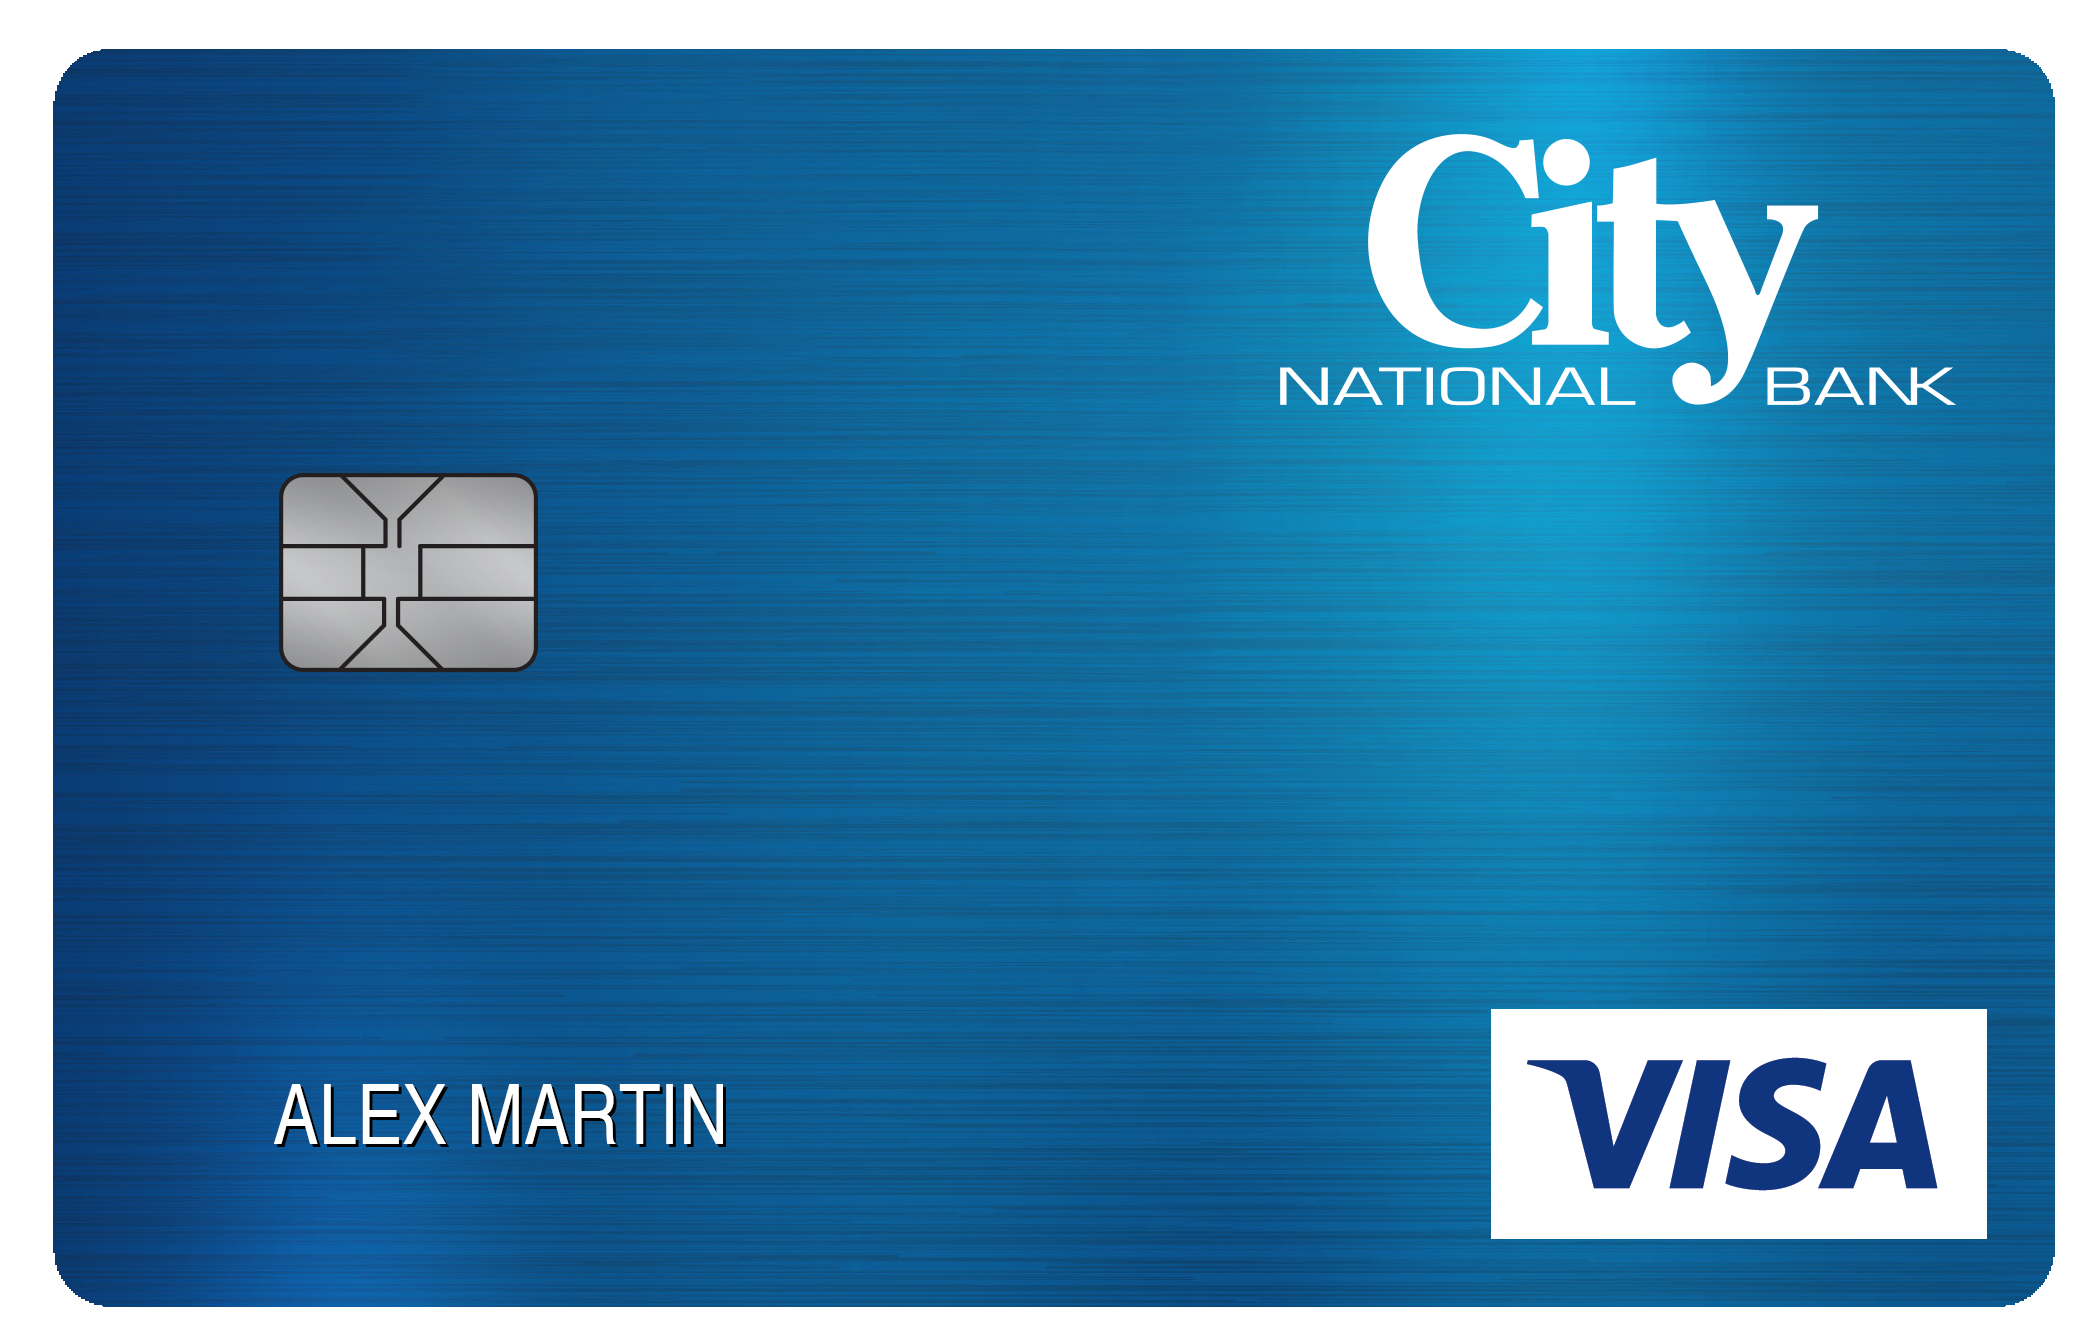 City National Bank Secured Card